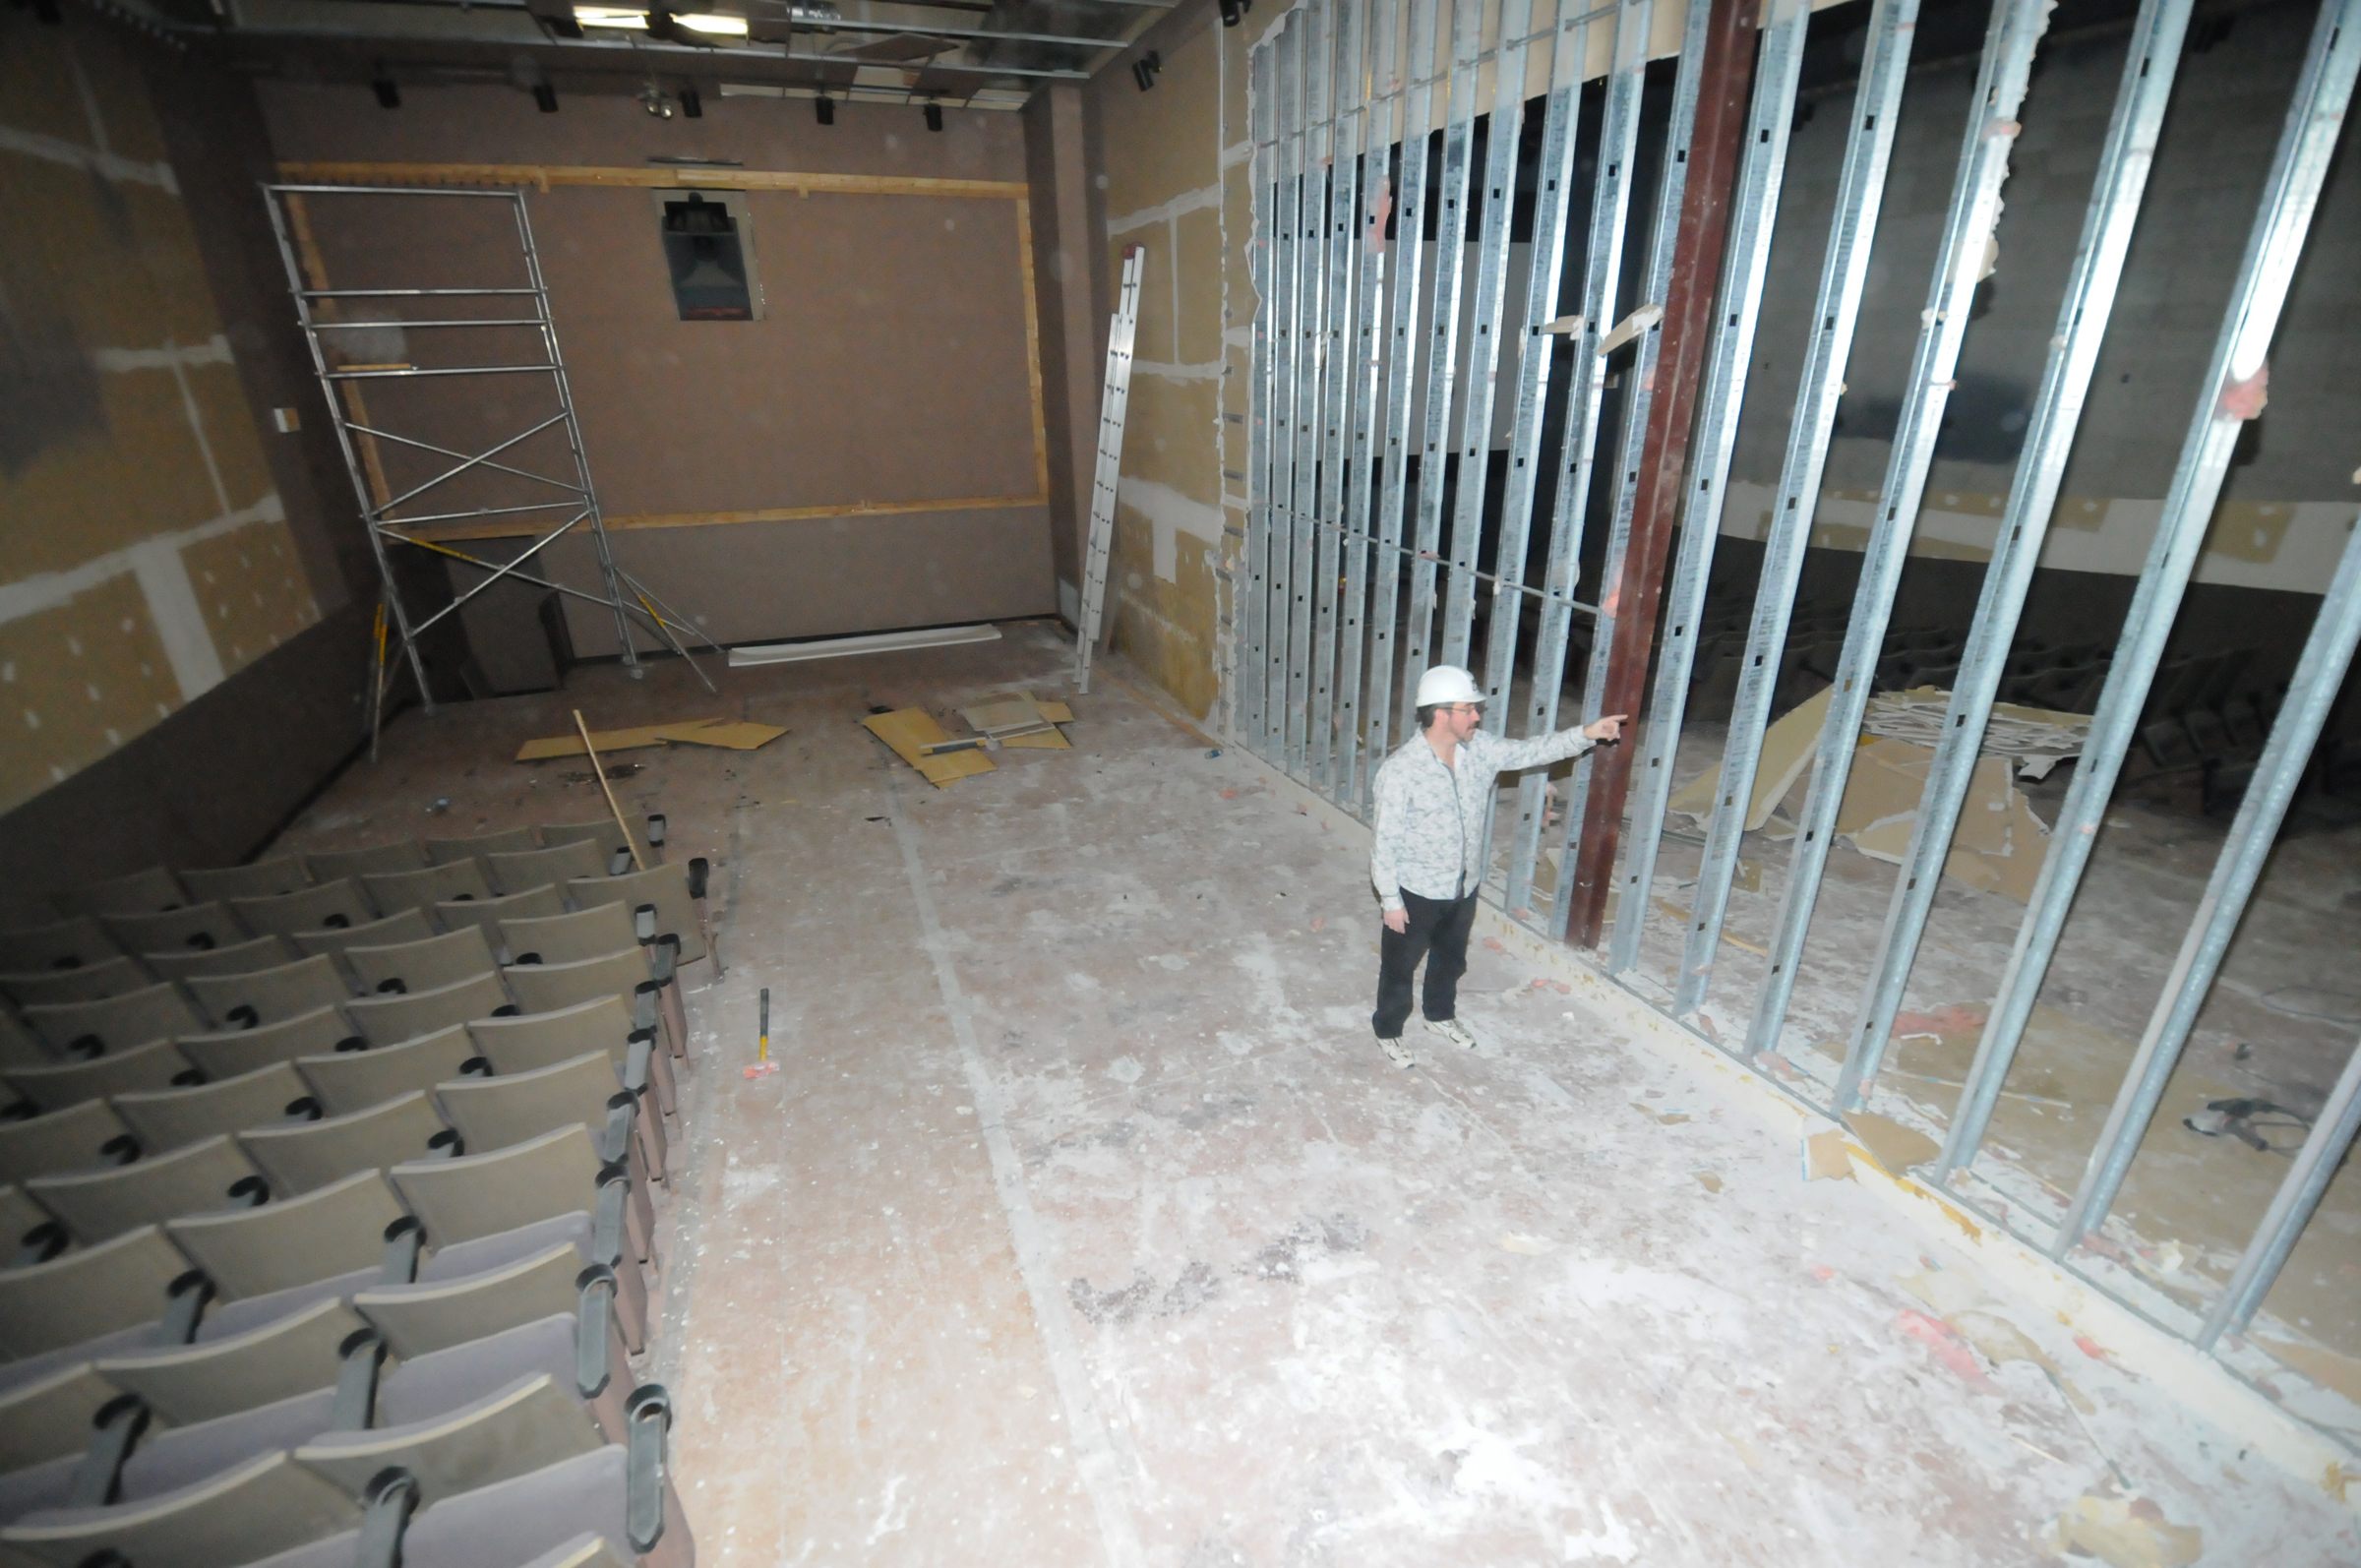 DEMOLITION- William Trefry explains about the renovations being done to the old Uptown Theatre